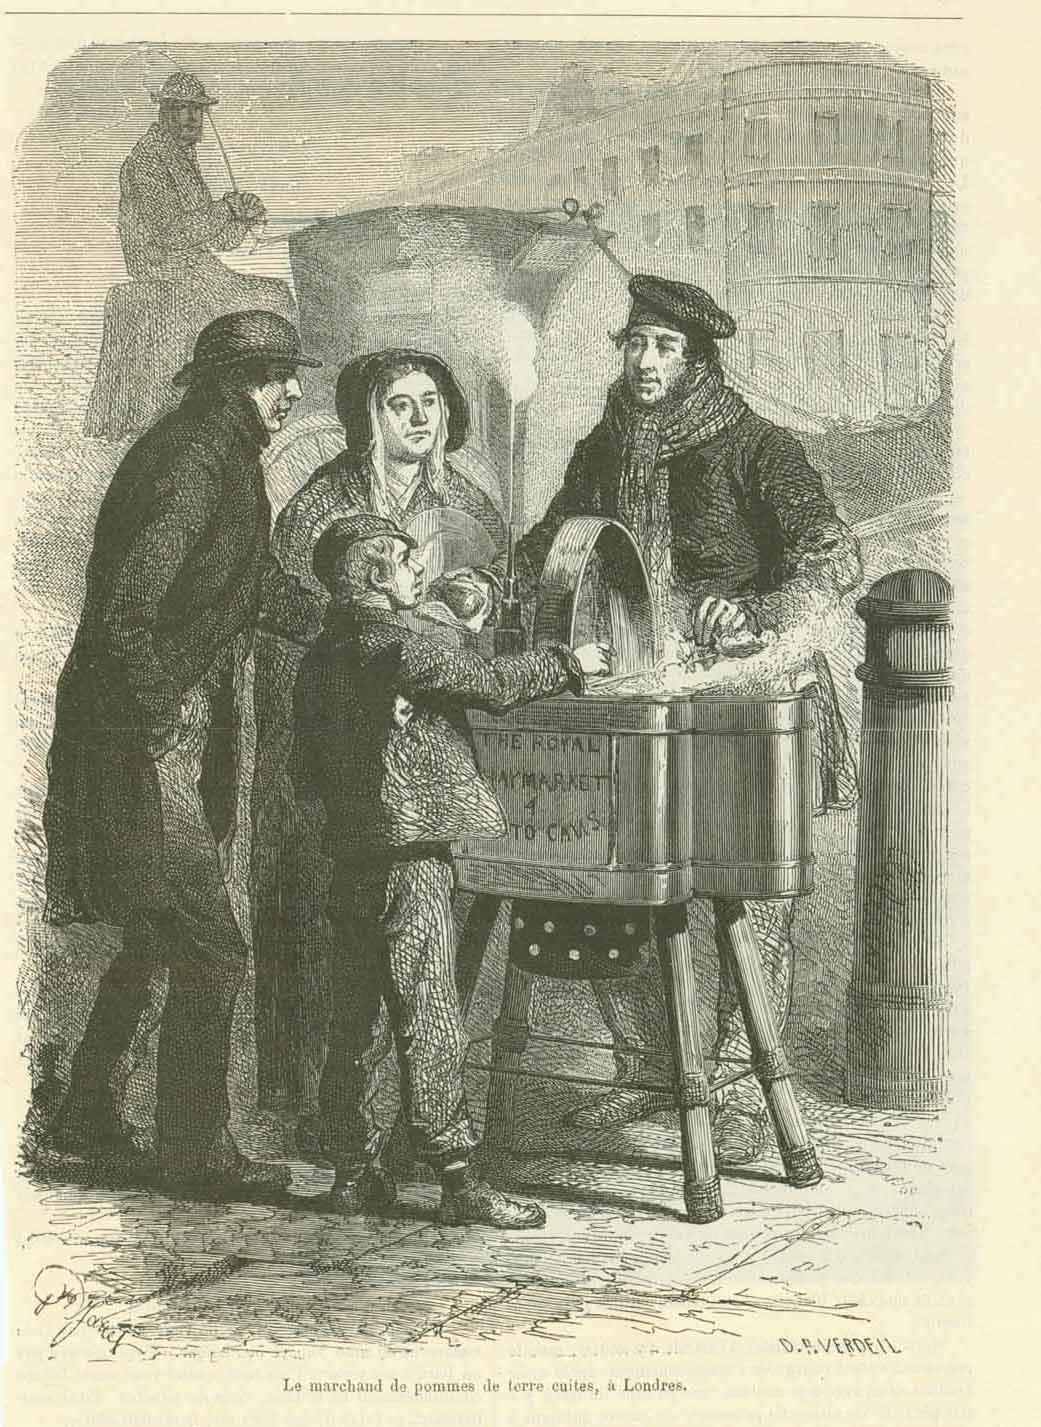 "Le marchand de pommes de terre cuites"  Wood engraving showing a vendor selling cooked potatoes. Most likely in England since the writing on the stand is  English and using the word "royal". Published 1878. Below the image is an article that continues on the reverse side about the eating of potatoes in France and England.